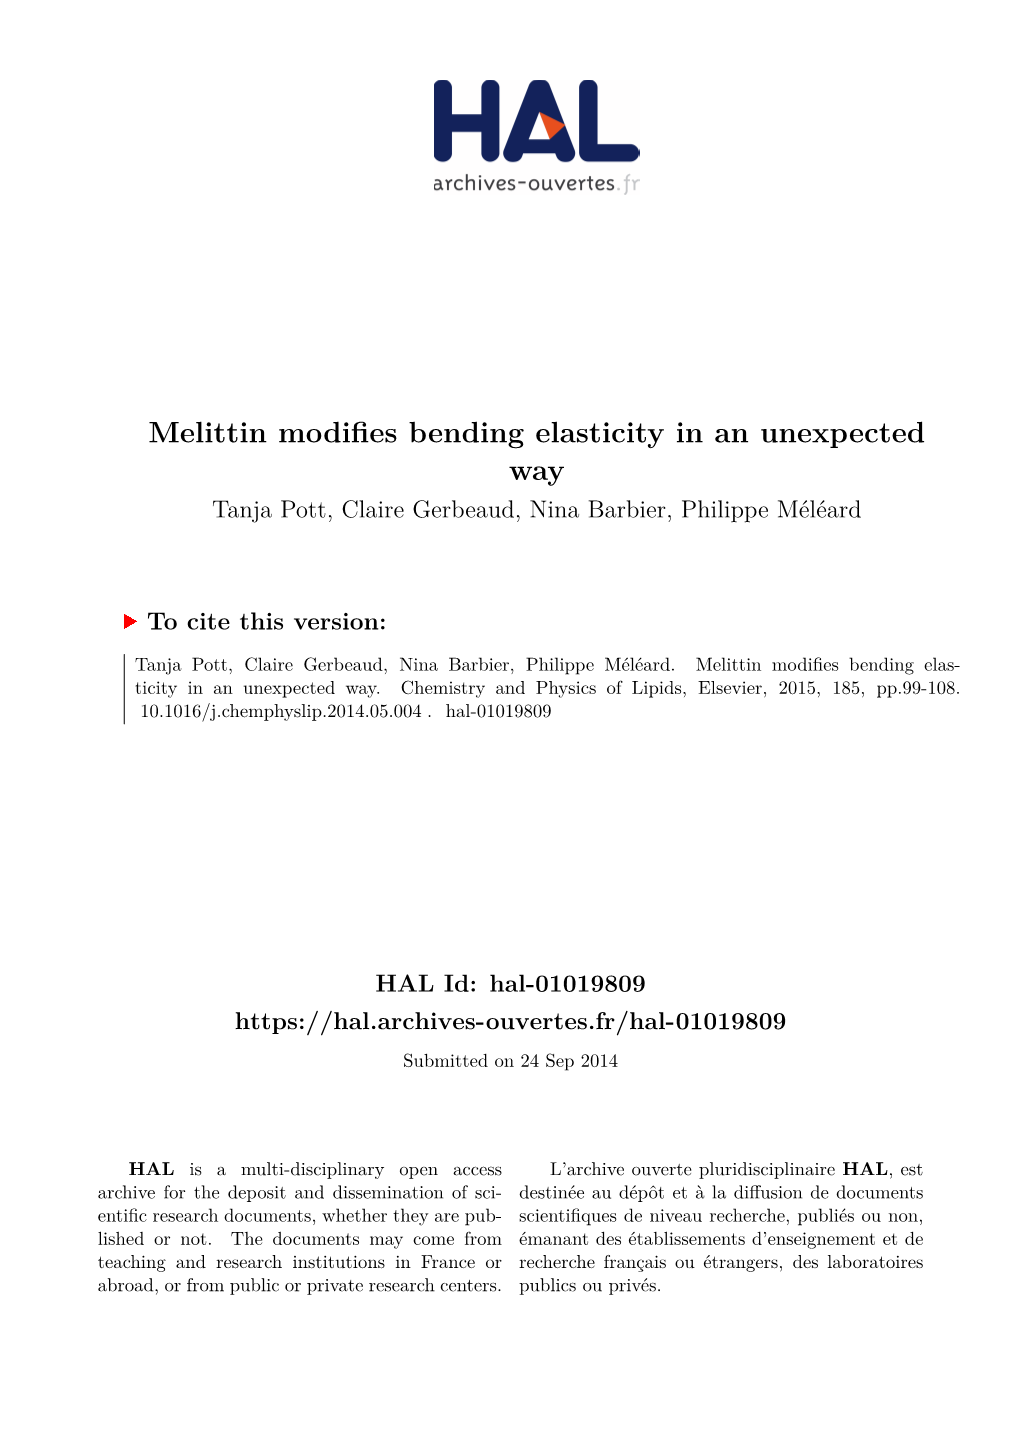 Melittin-Modifies Accepted Ver